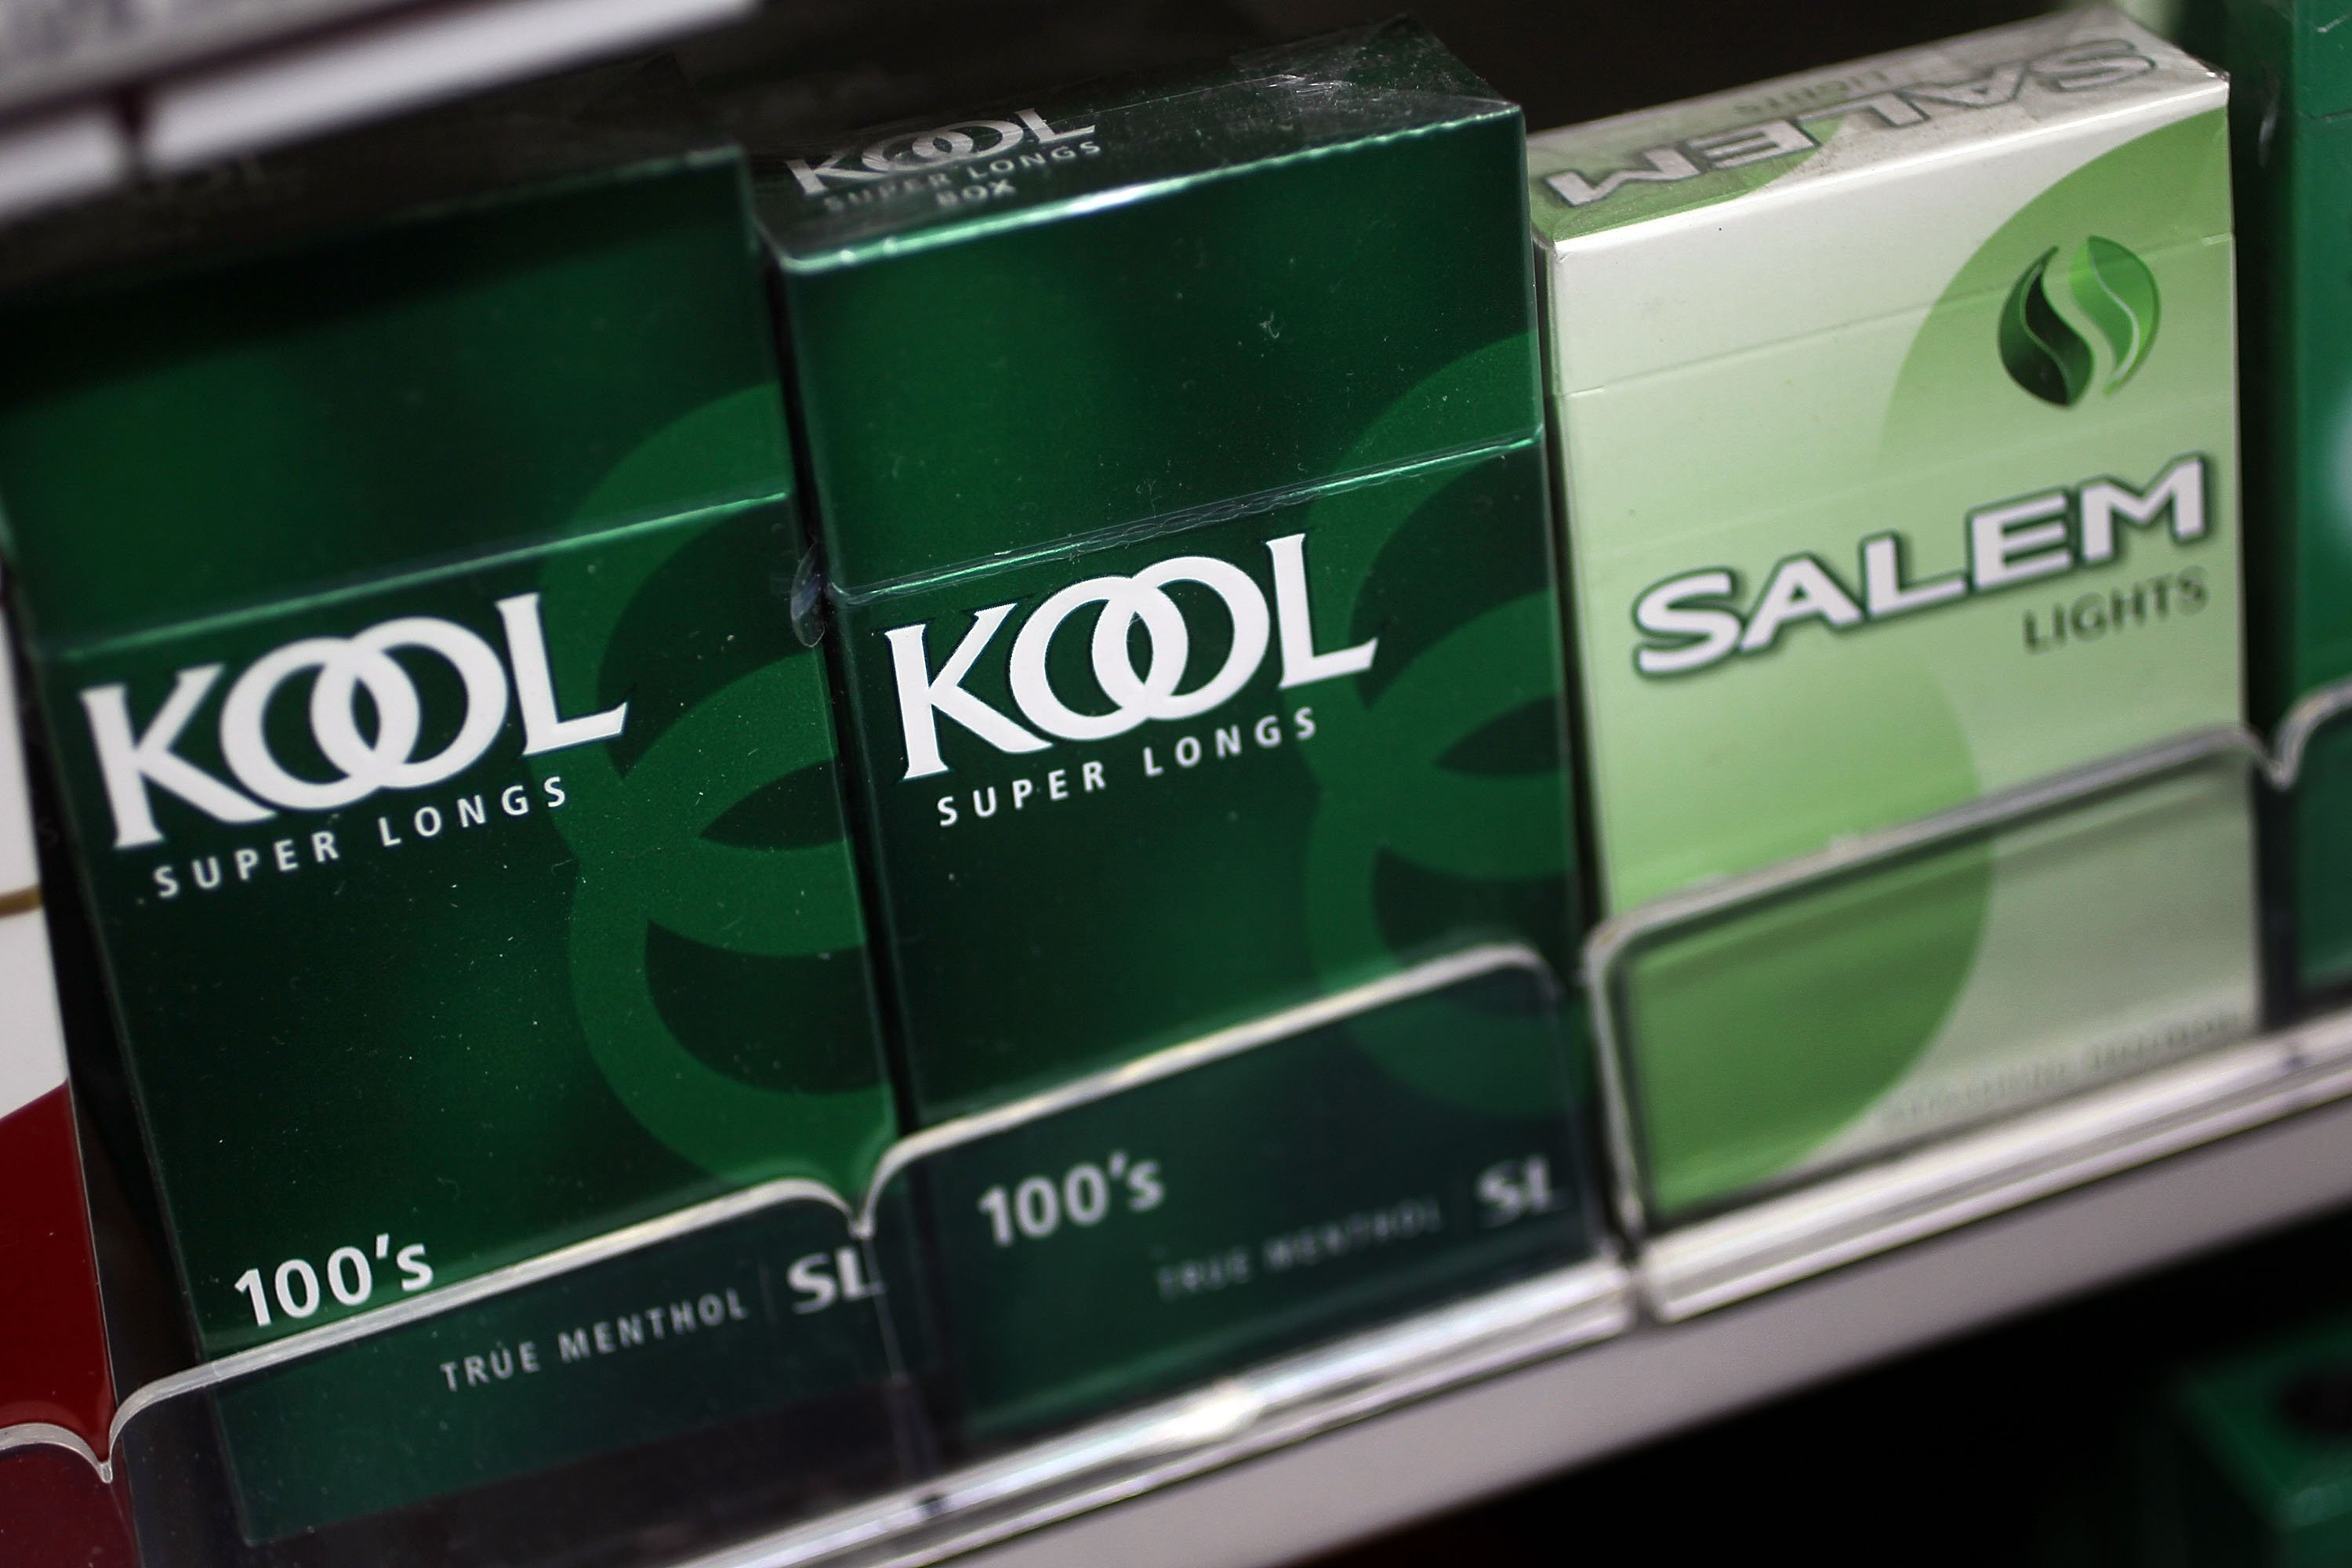 Menthol cigarettes are seen for sale on a shelf at a Quick Stop store on March 30, 2010 in Miami, Florida. Joe Raedle/Getty Images